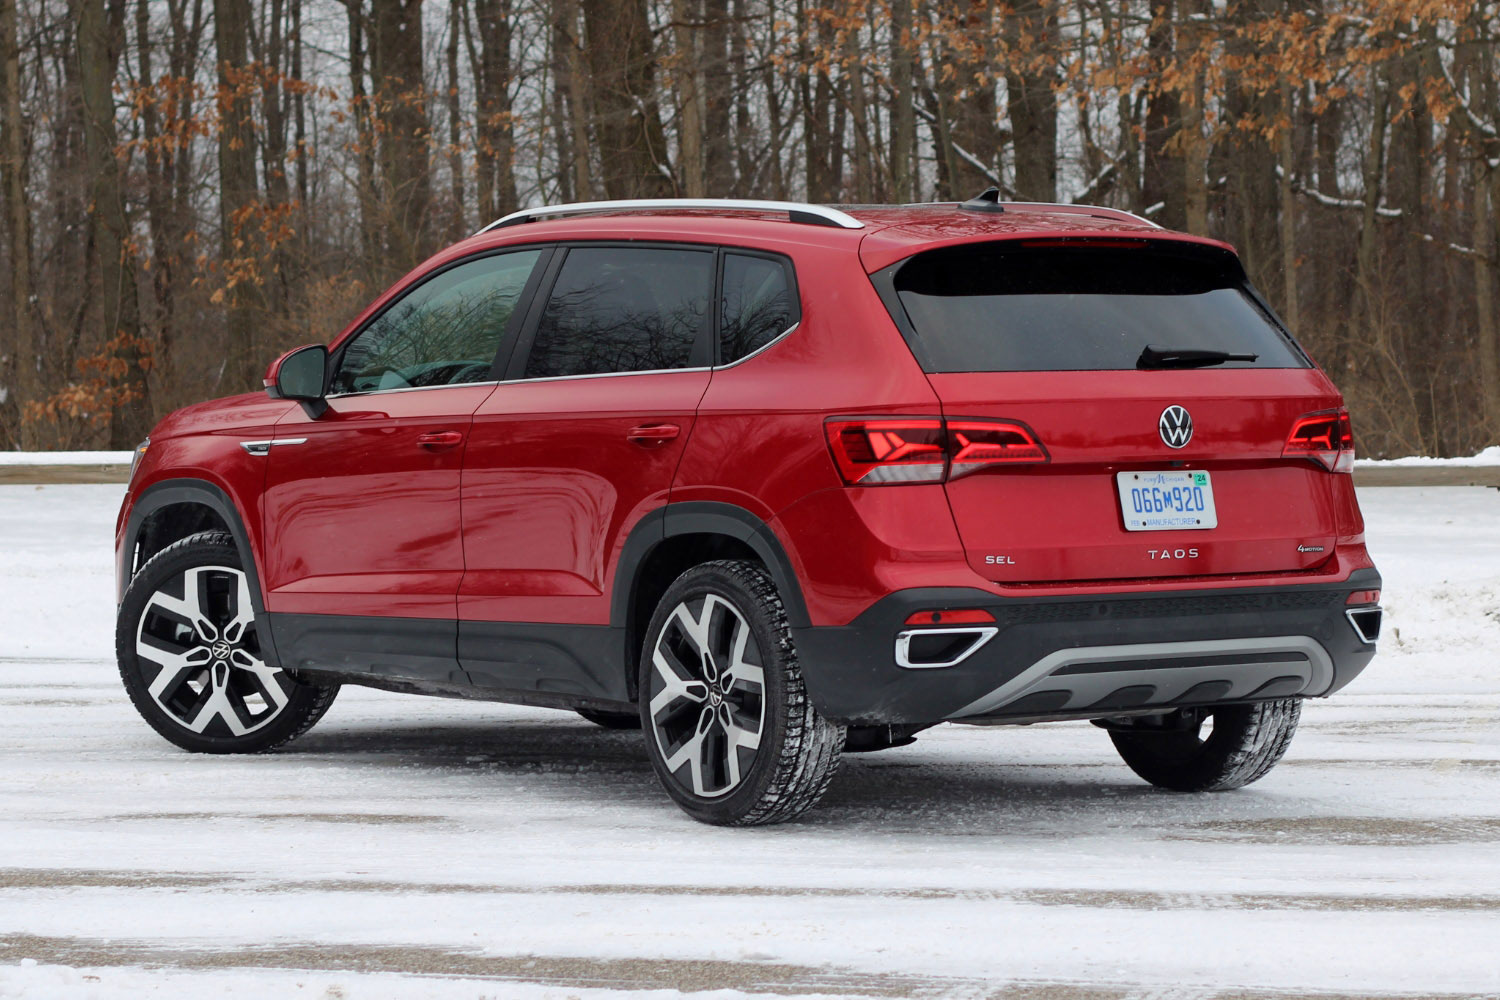 VW Taos vs Tiguan: What's the Difference?